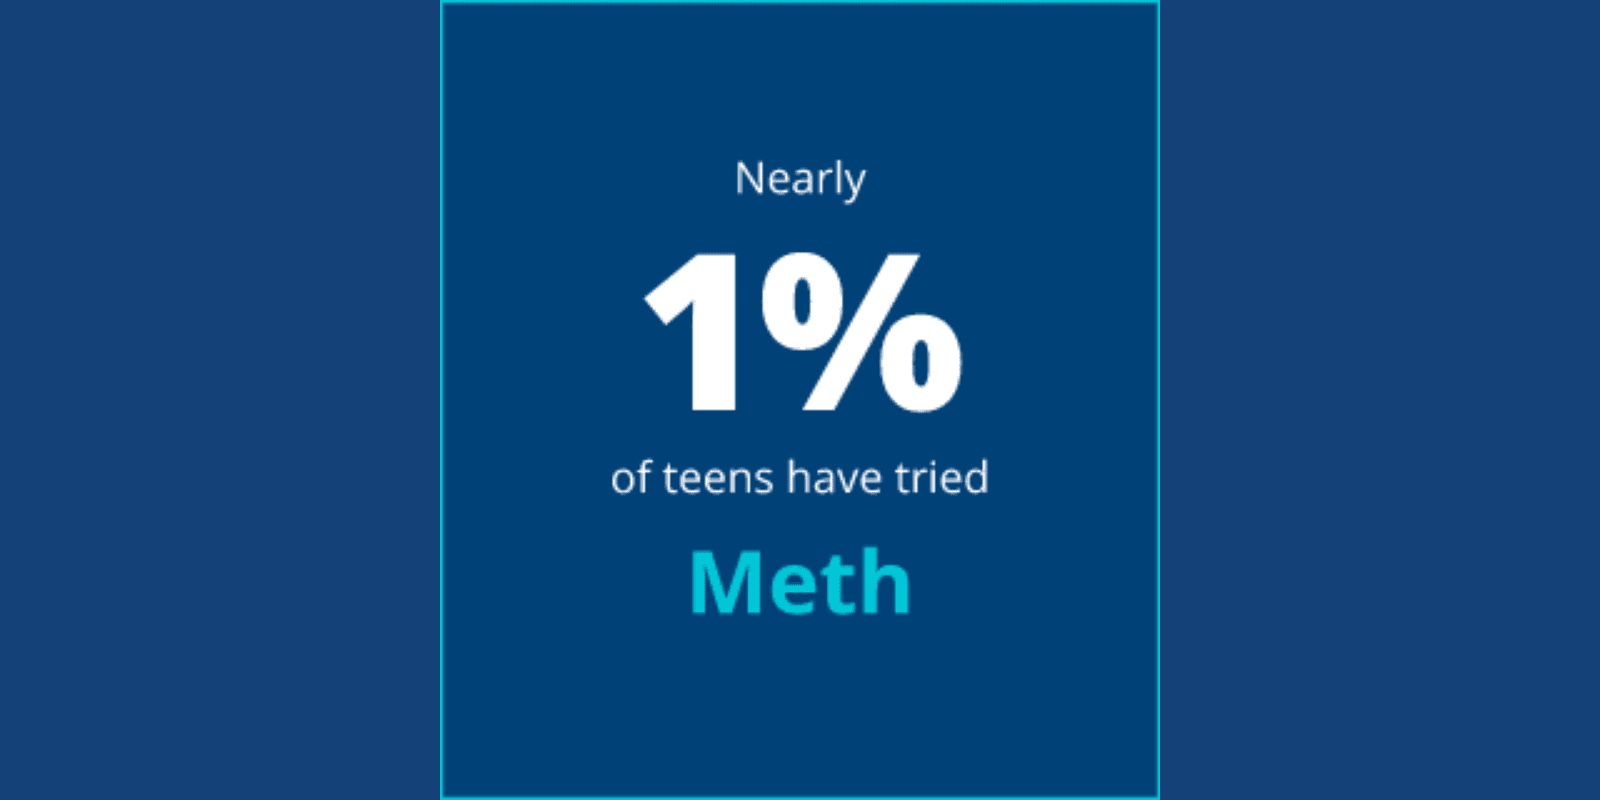 Nearly 1% of teens have tried meth